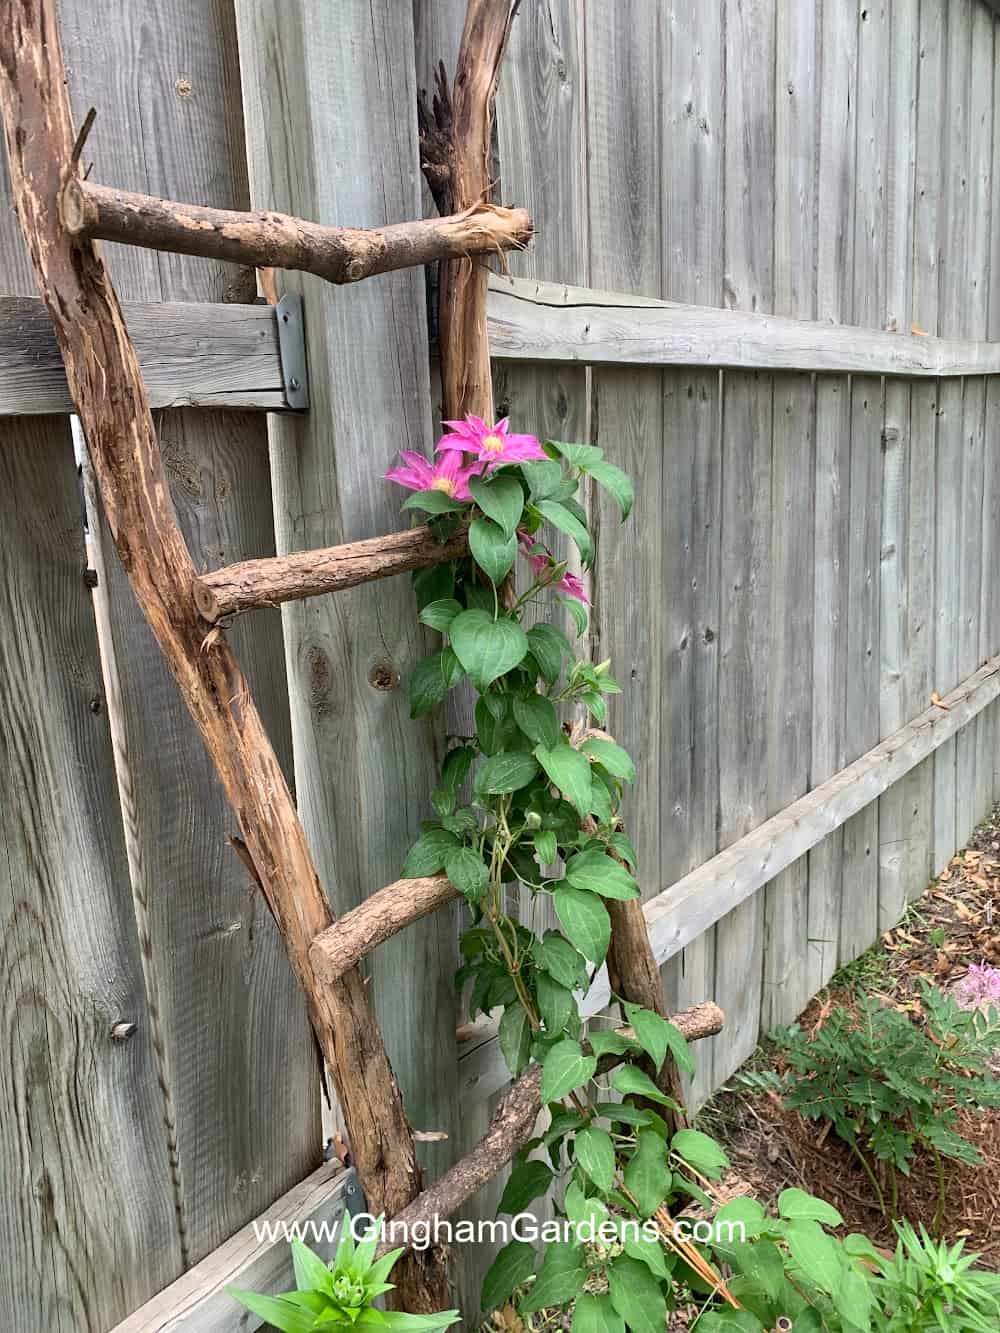 Ladder made from tree branches with a pink flowered clematis vine growing on it.